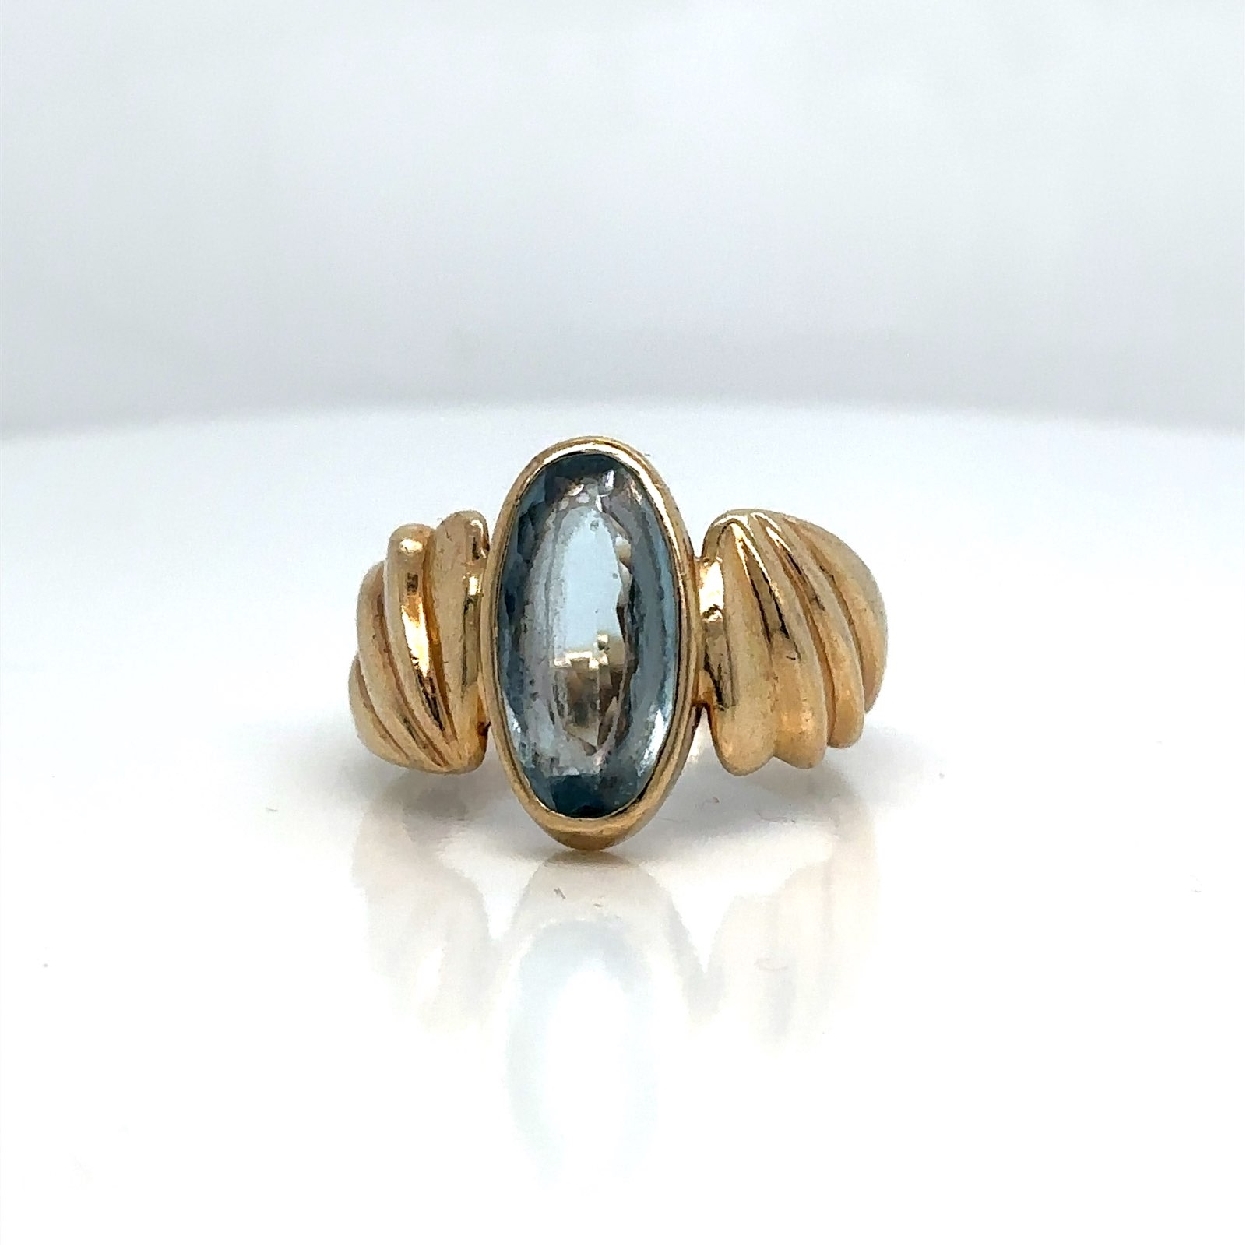 14K Yellow Gold and Oval Aquamarine Ring

Size 9.25